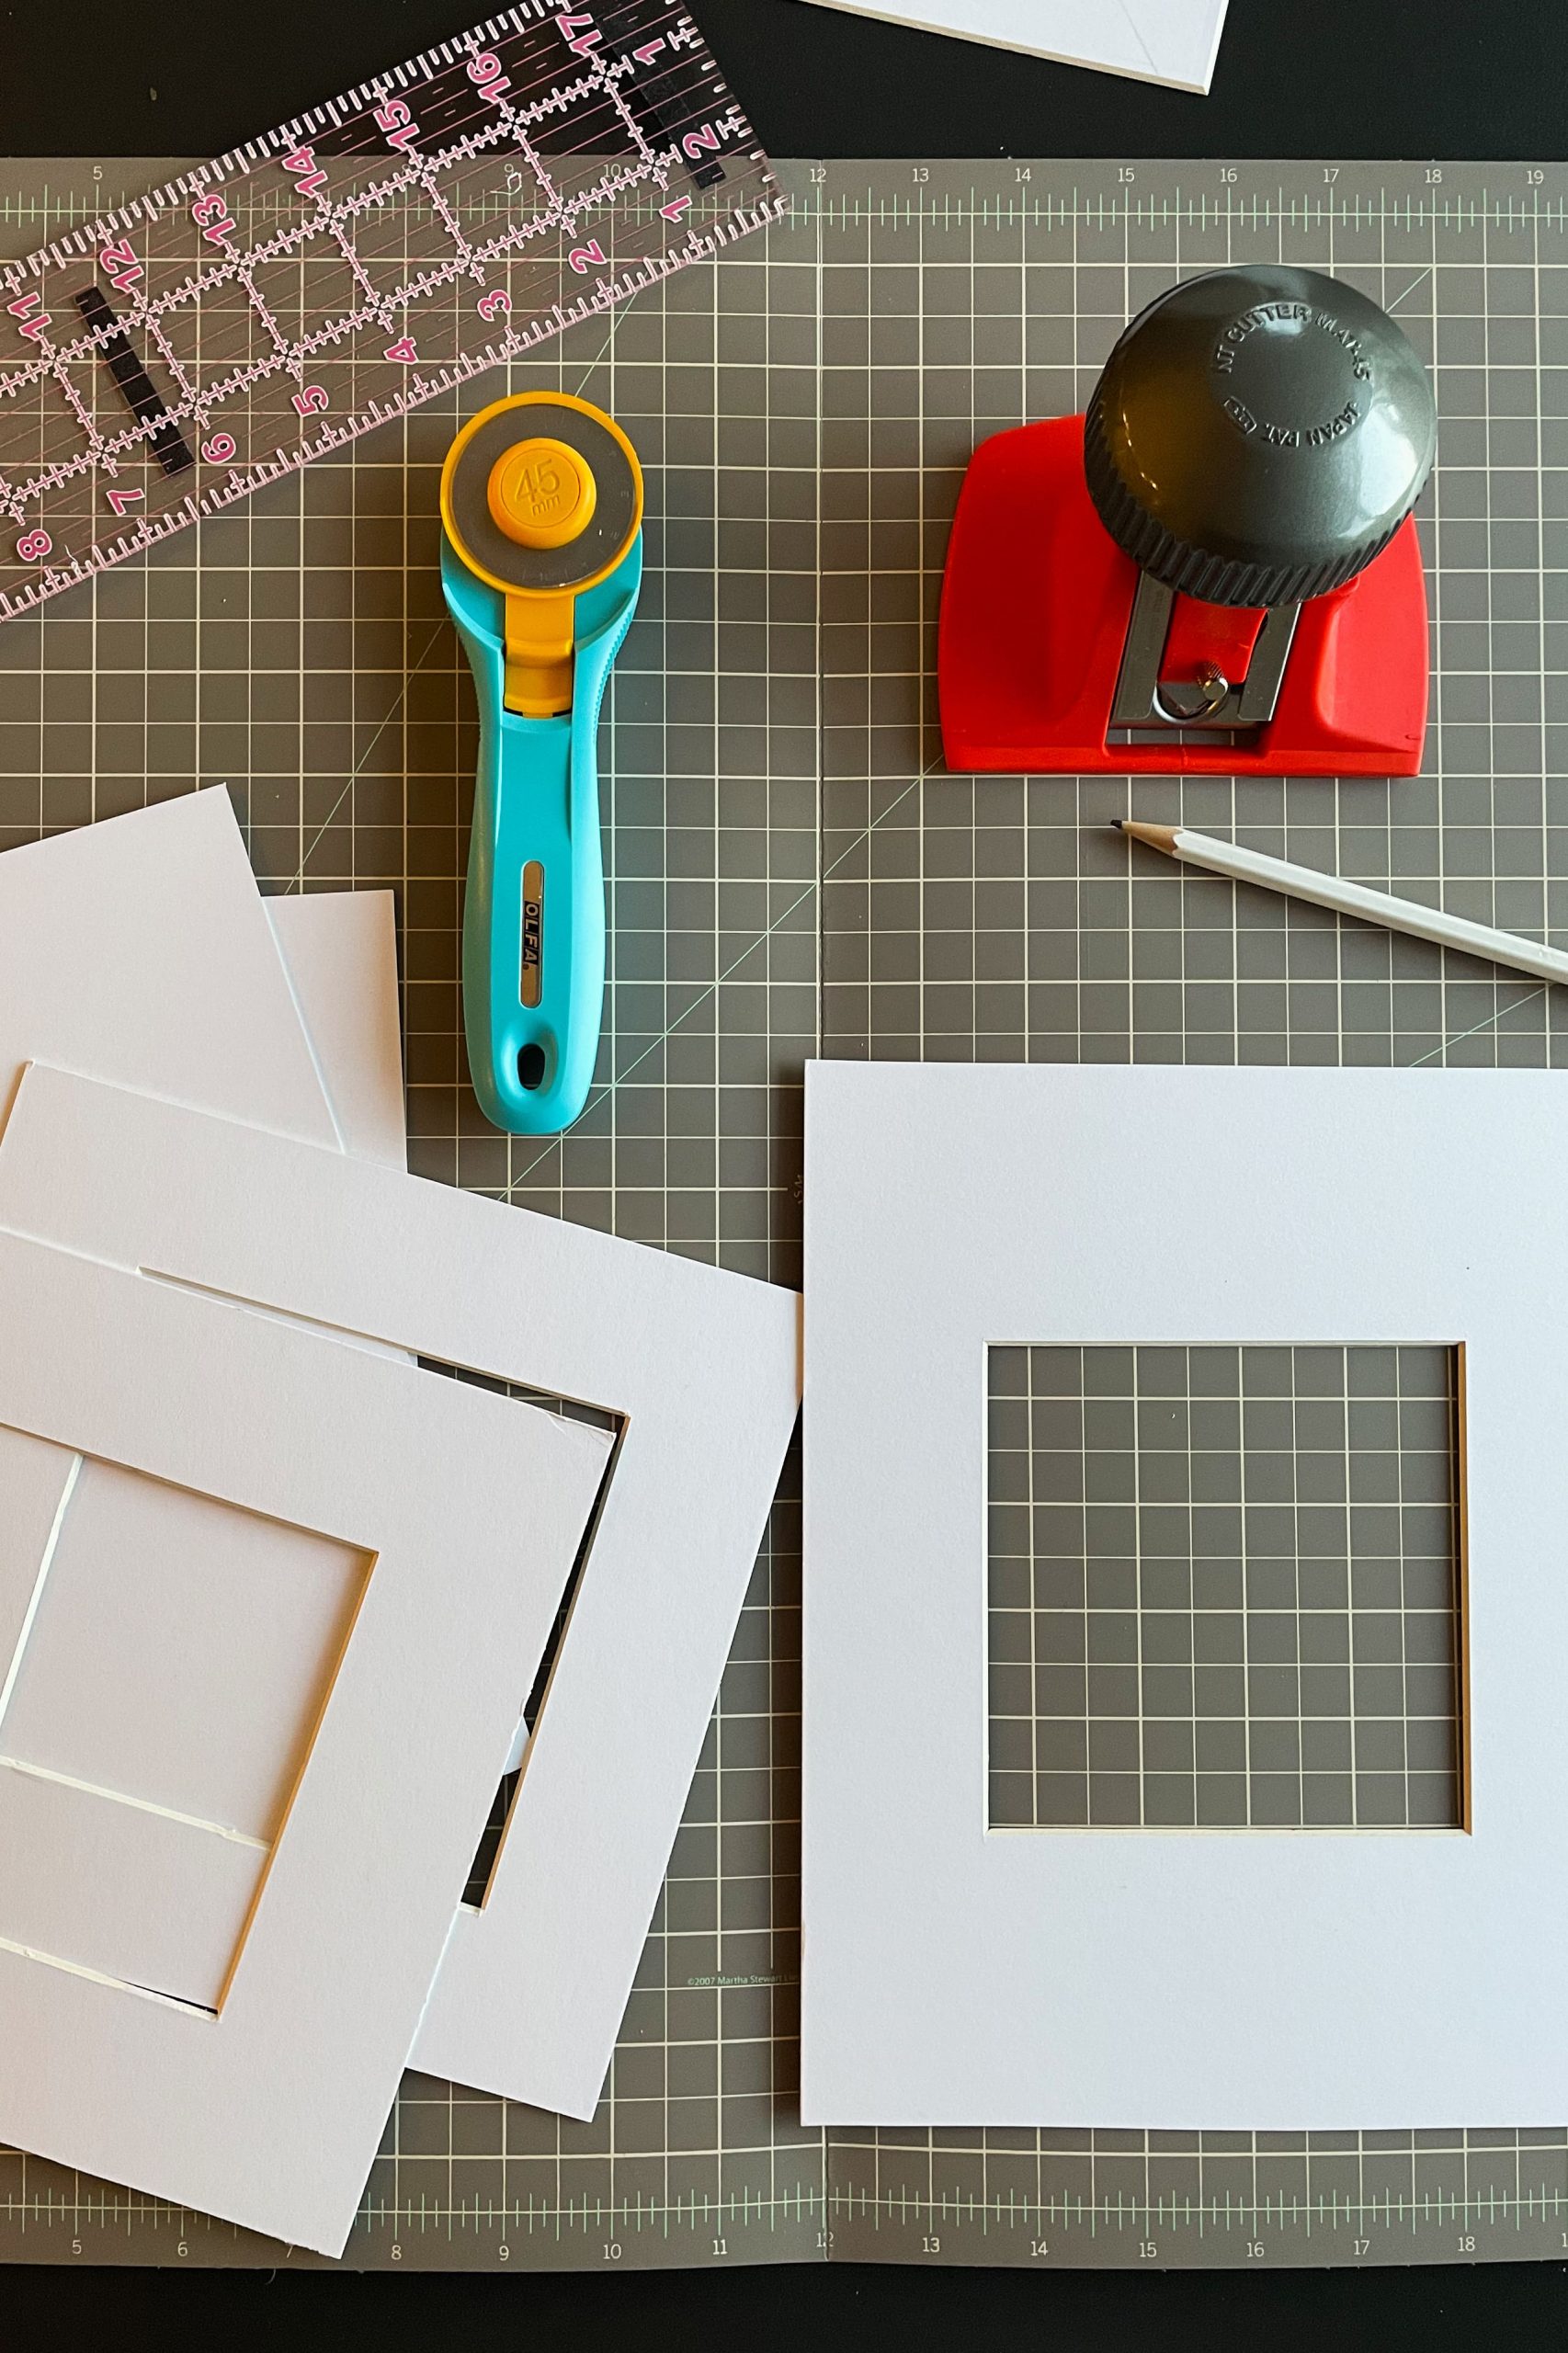 Different Matboard Styles: How Much Matting Do I Need?